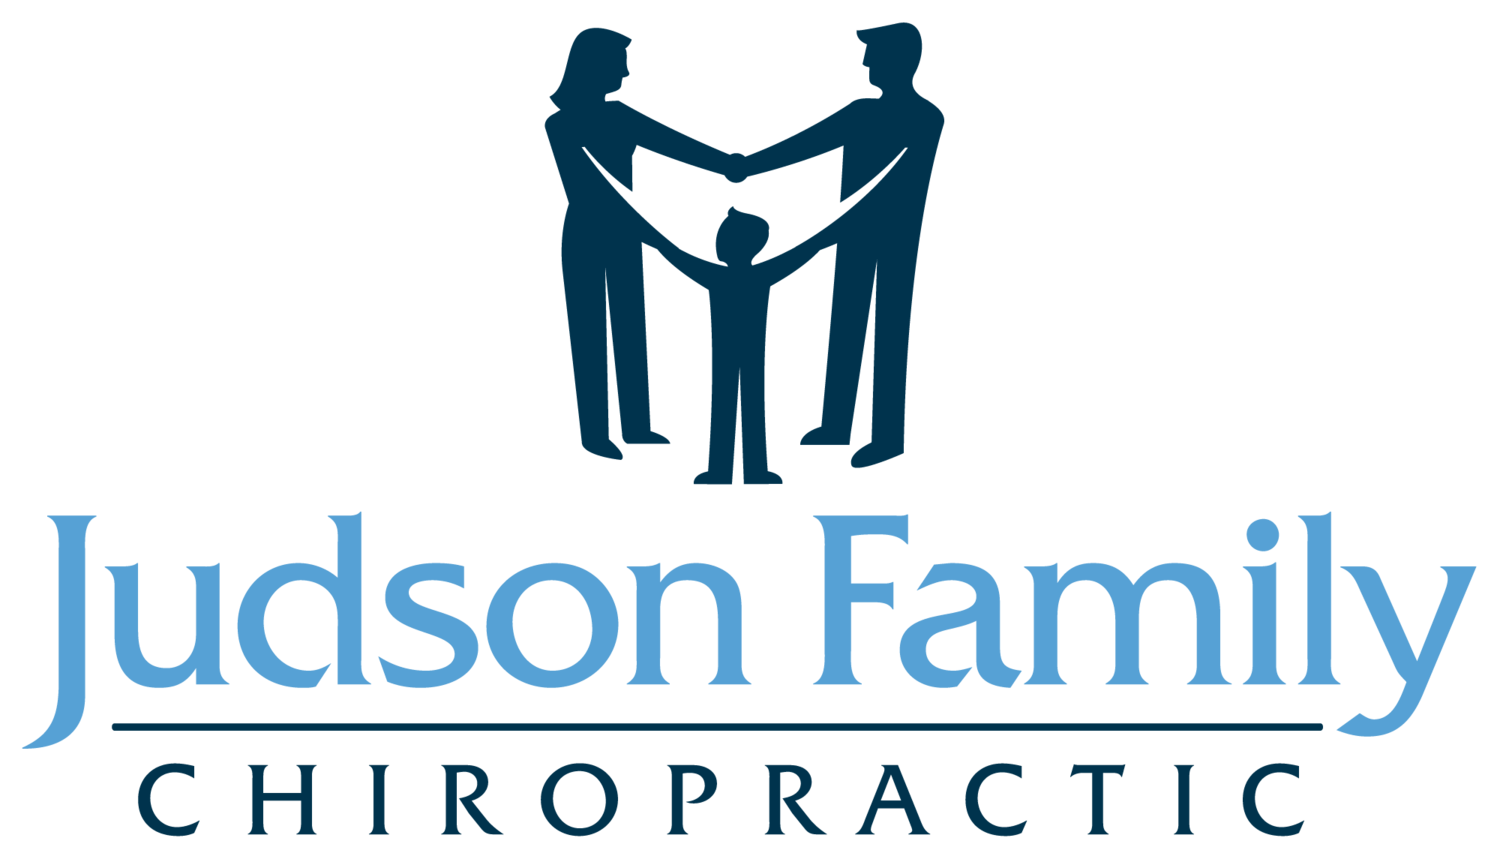 Judson Family Chiropractic